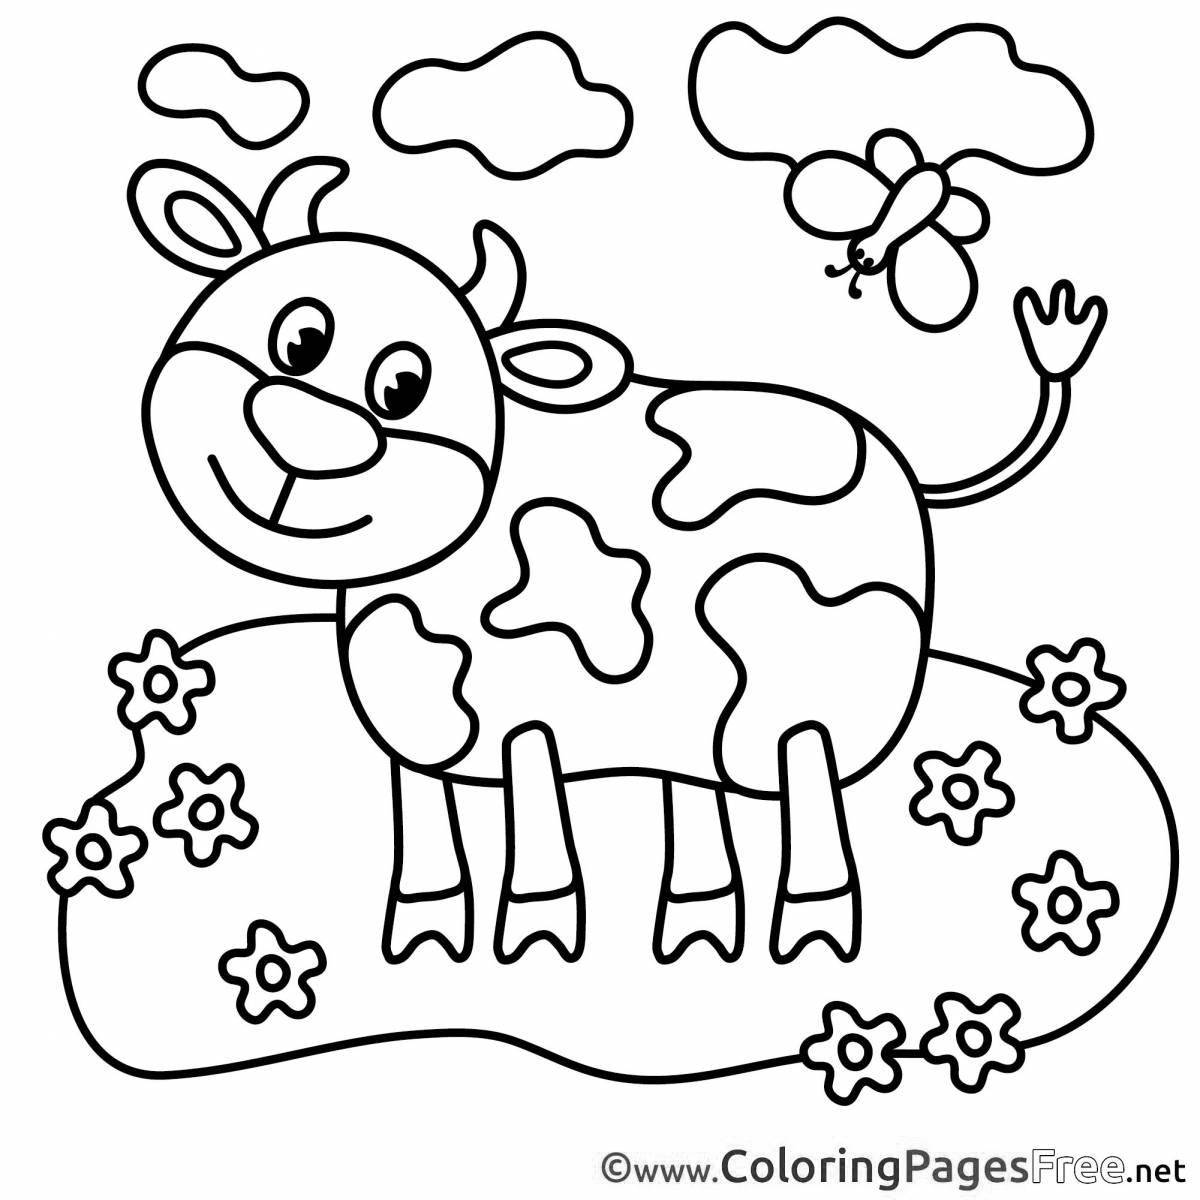 Colouring bright cow for preschoolers